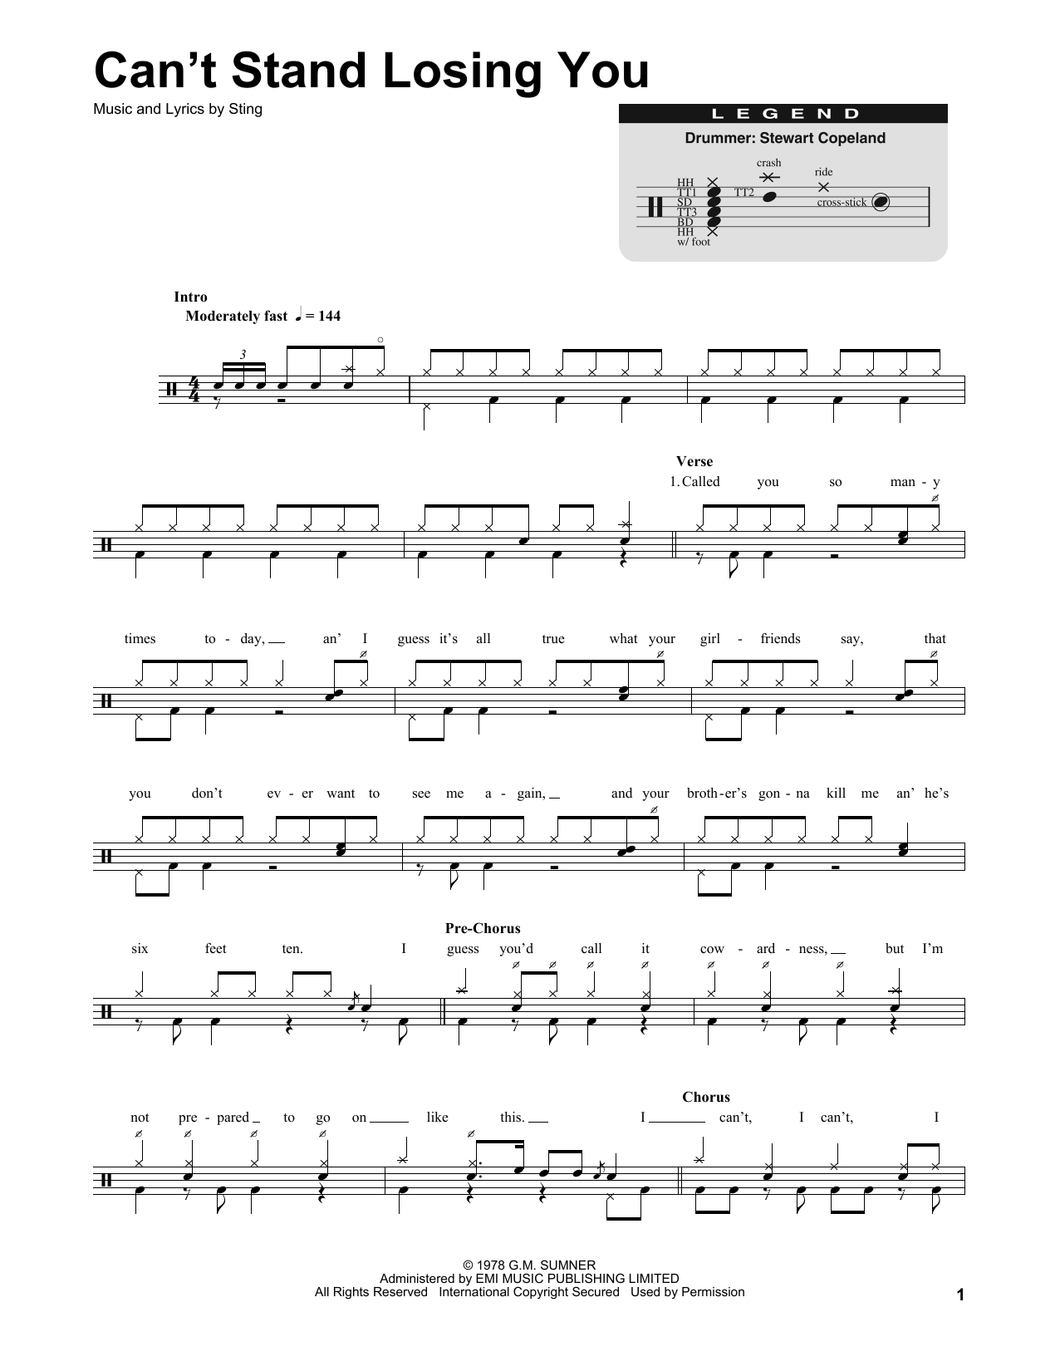 Can't Stand Losing You - The Police - Full Drum Transcription / Drum Sheet Music - SheetMusicDirect DT